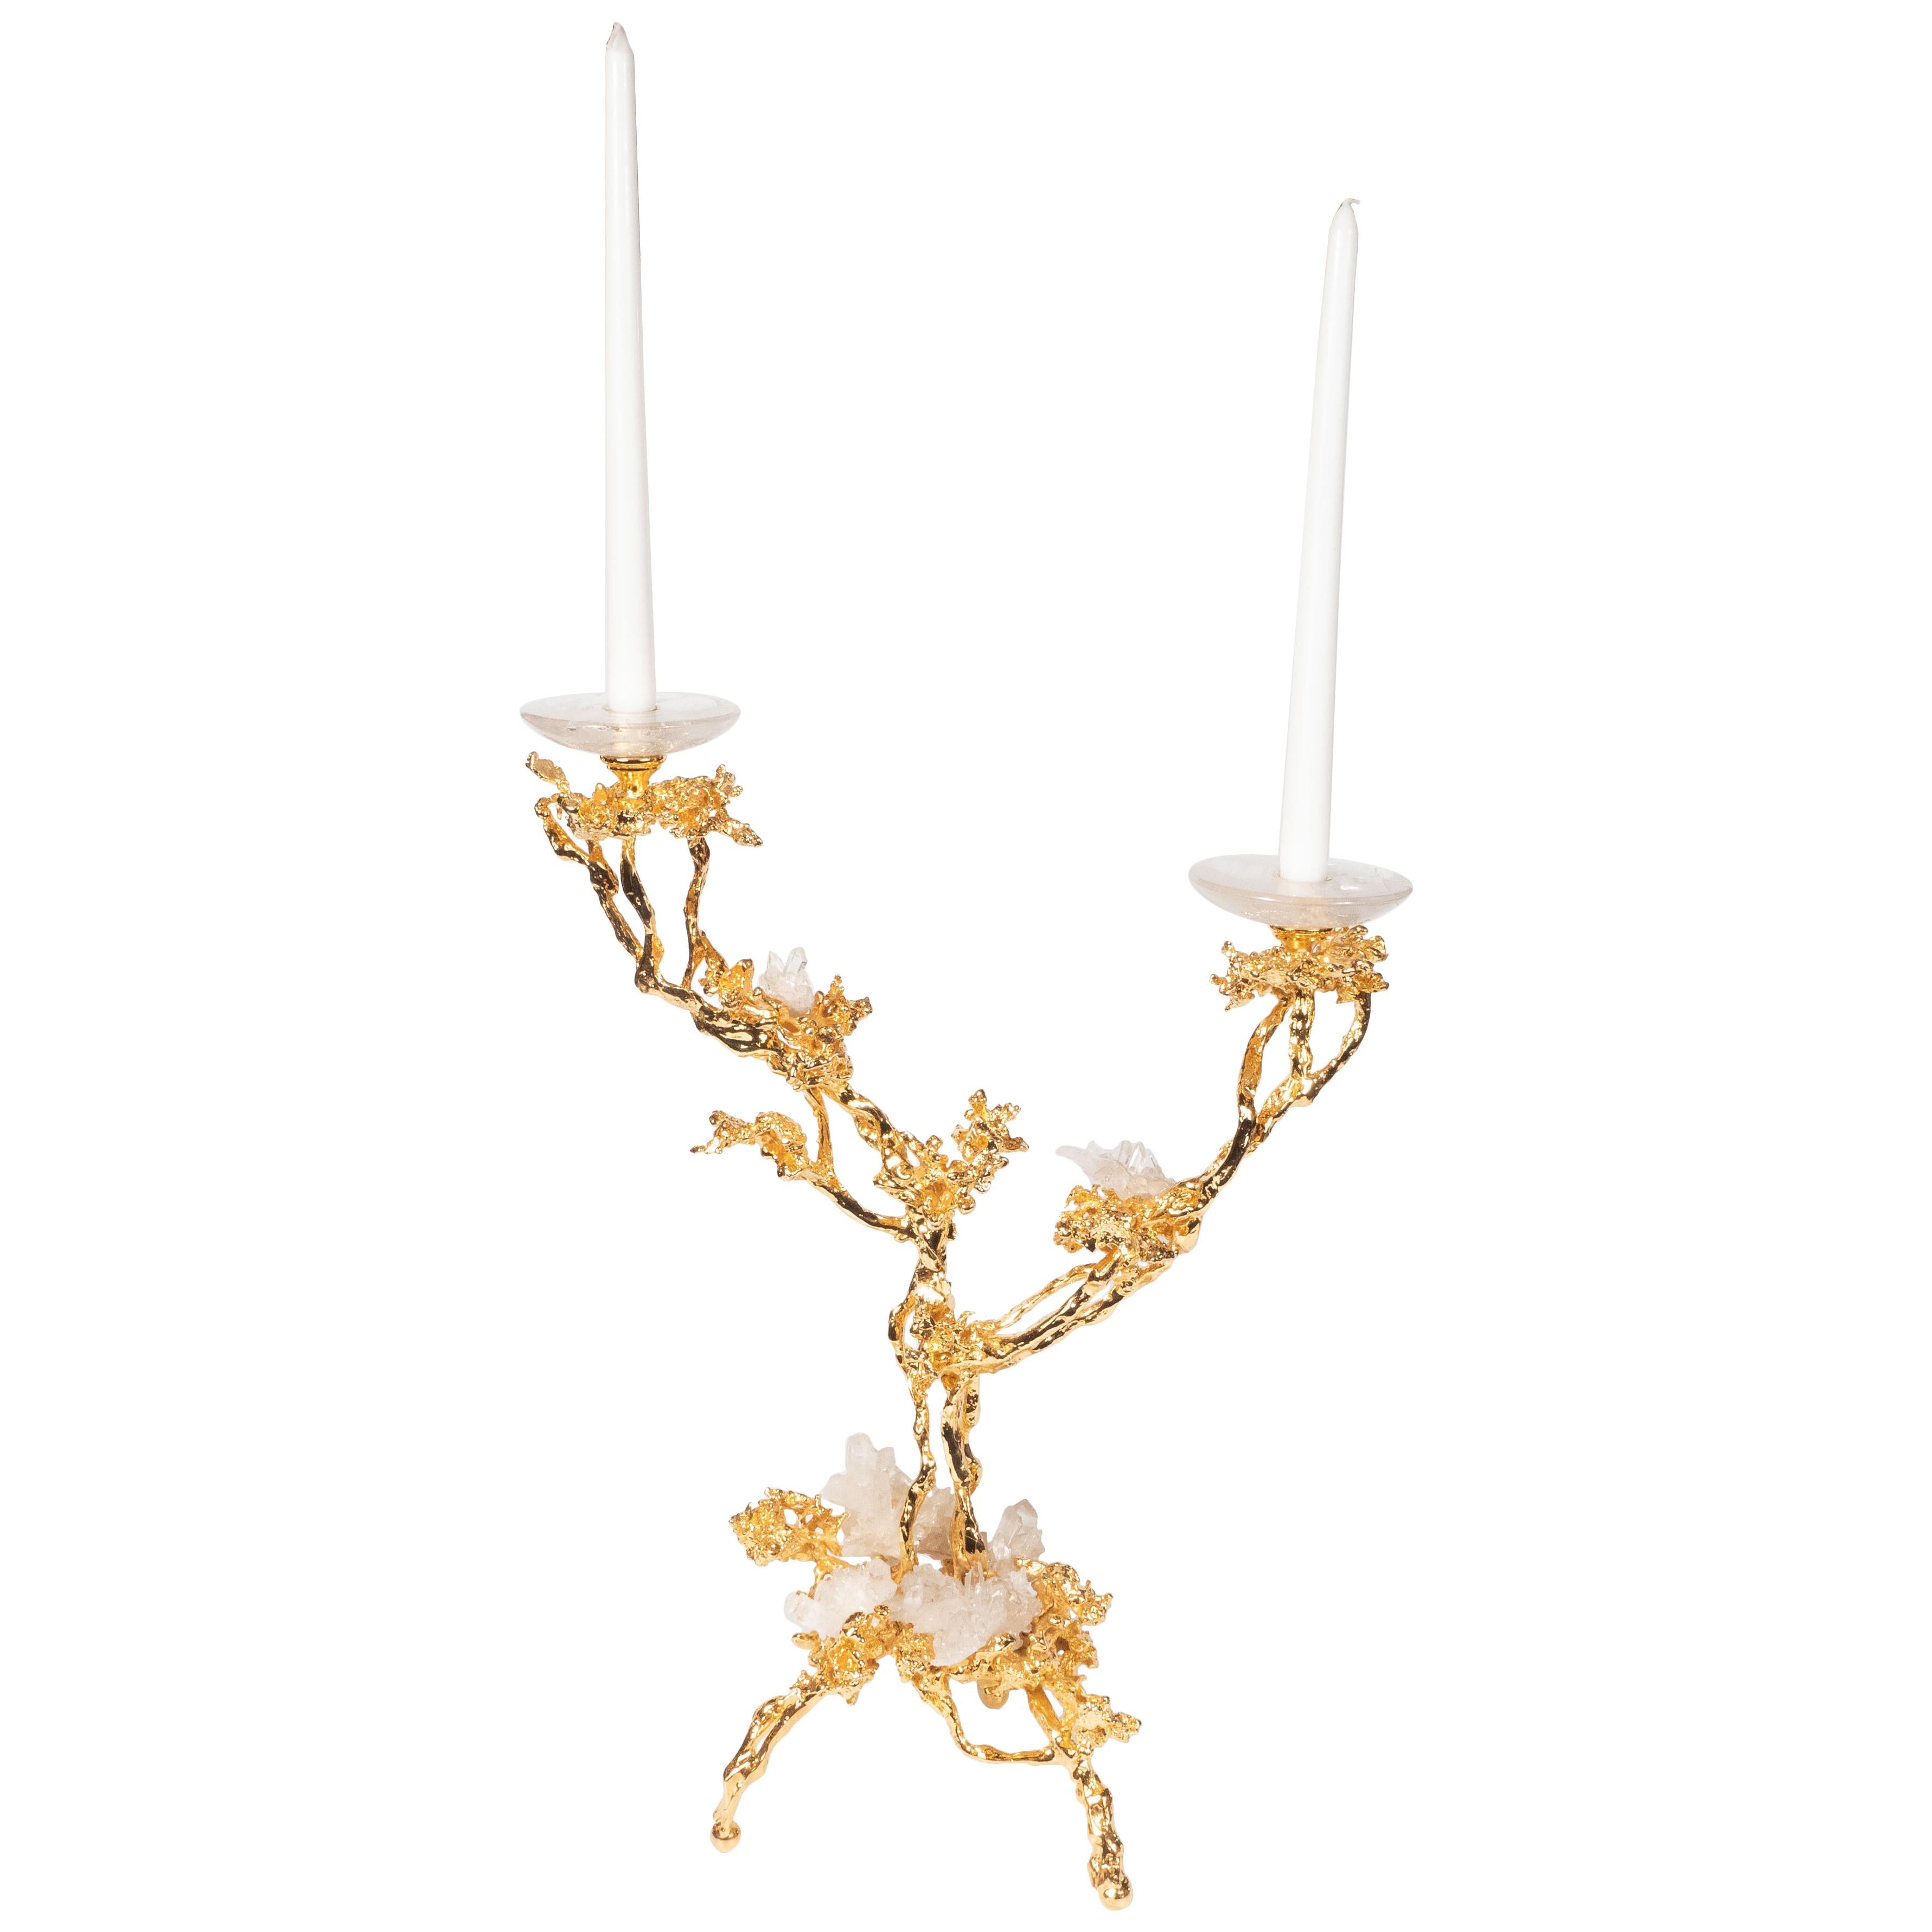 Pair of 24kt Gold Double Branch Candlesticks with Rock Crystals, Claude Boeltz For Sale 9